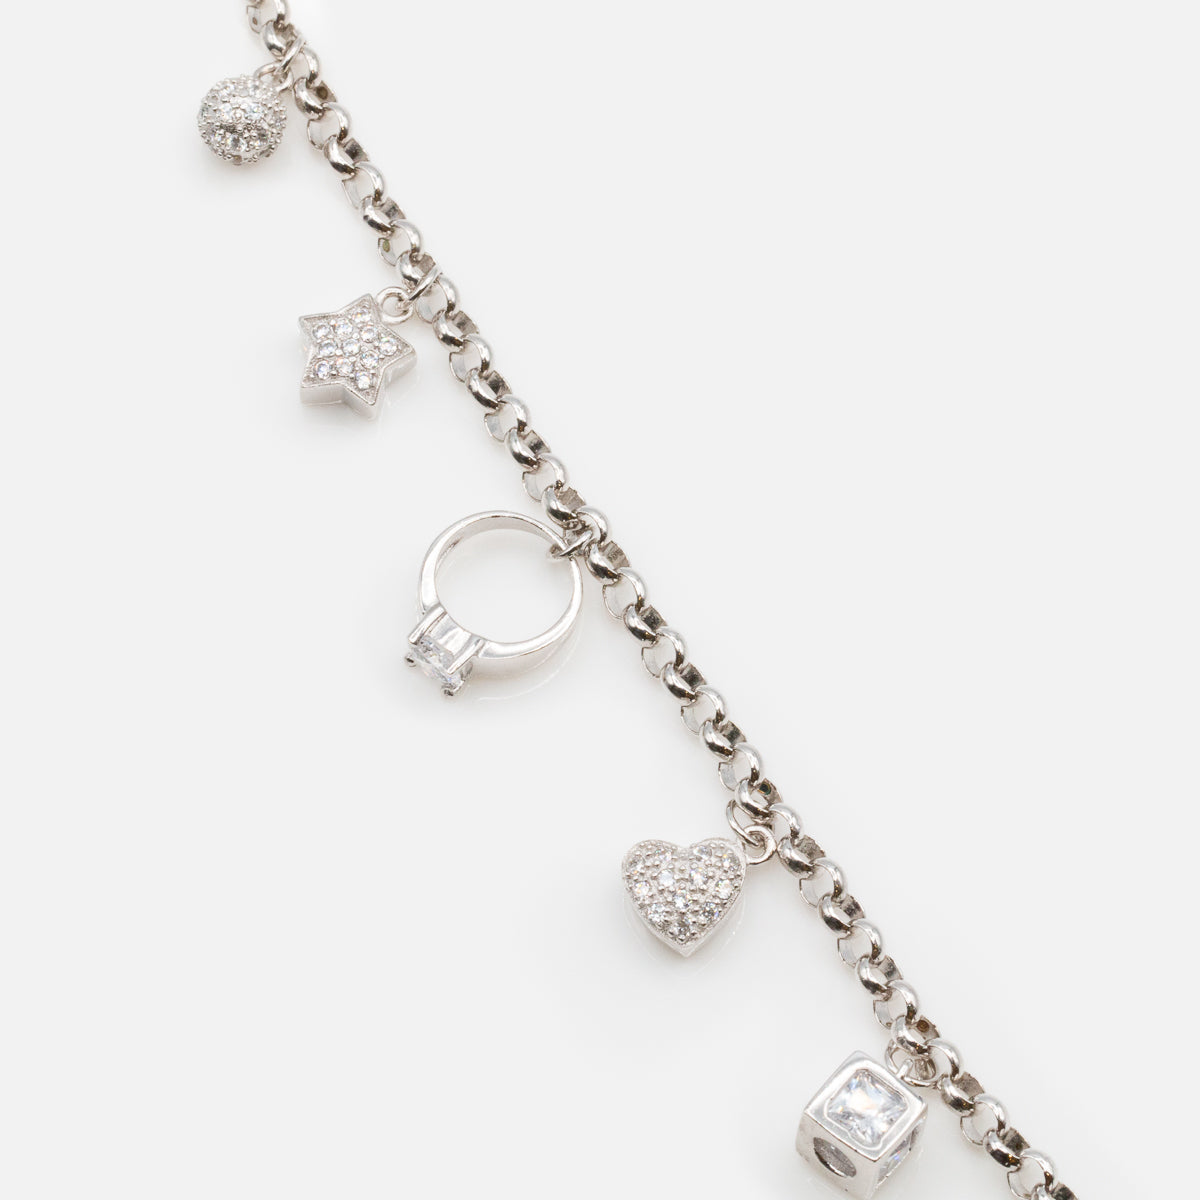 Bracelet with cubic zirconia charms in sterling silver